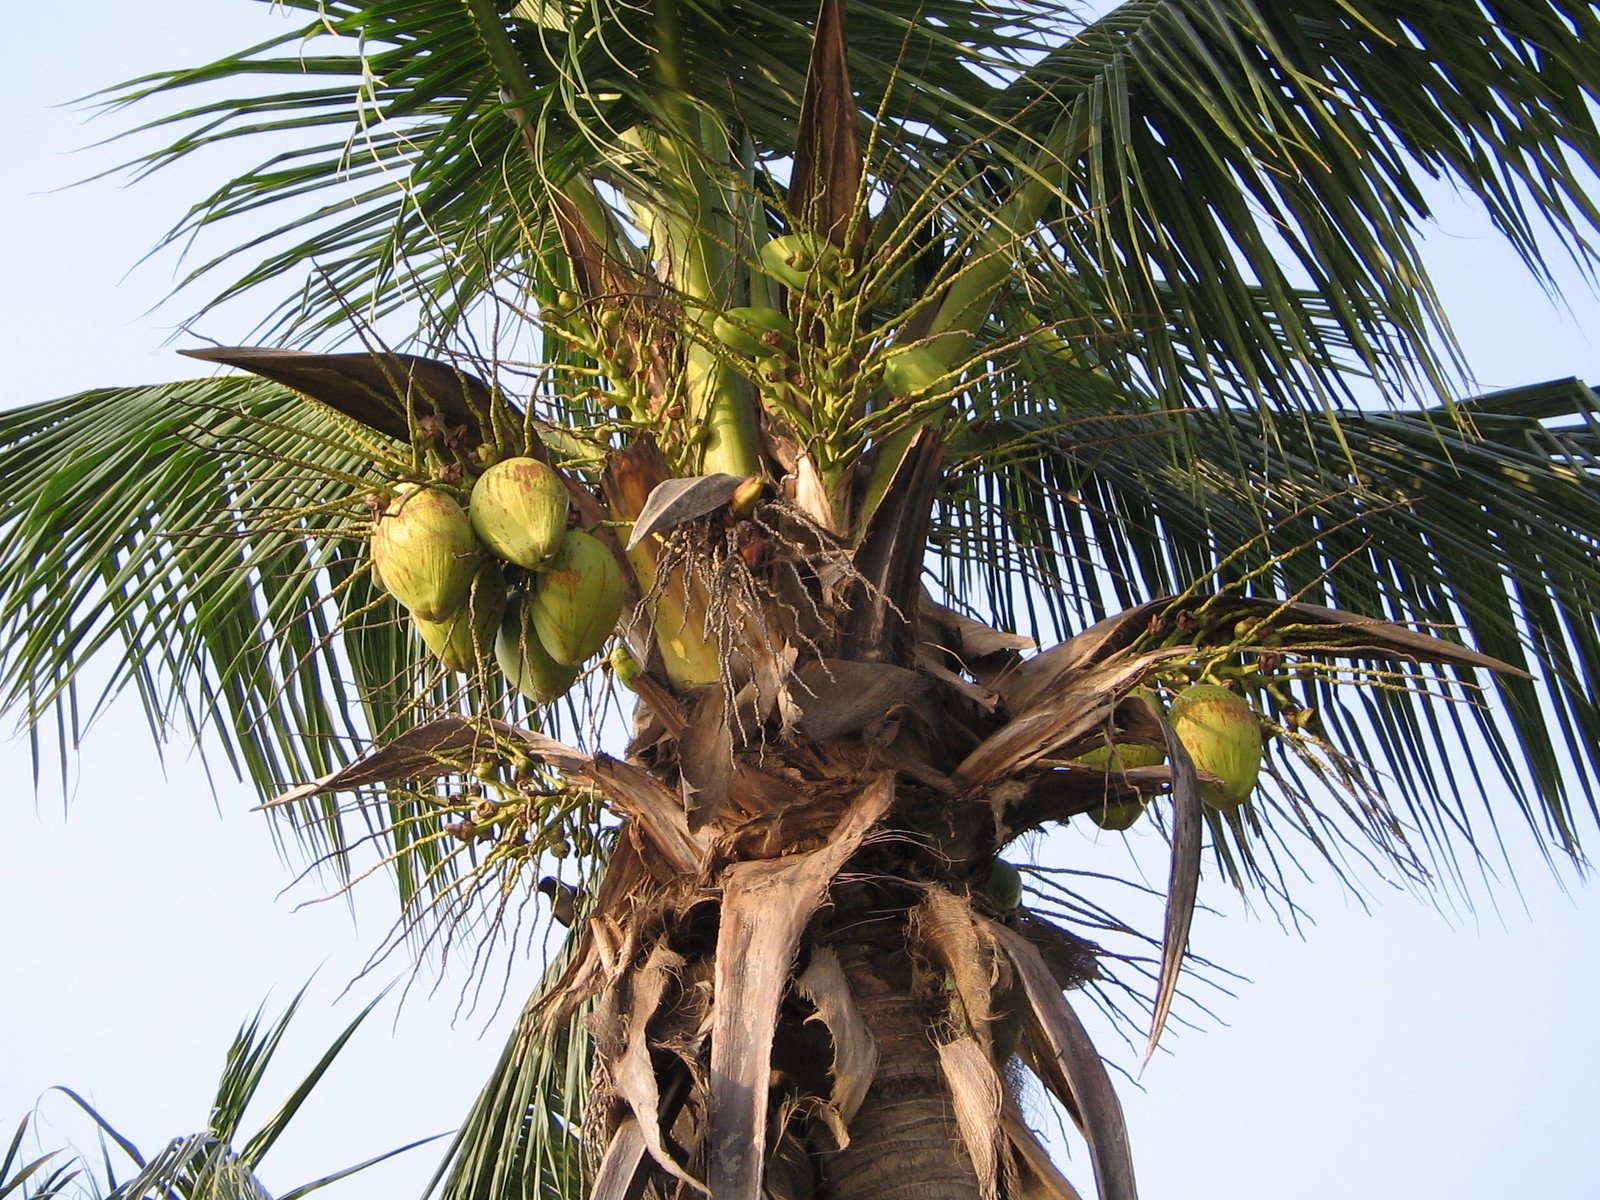 a palm tree is shown with coconuts on the top